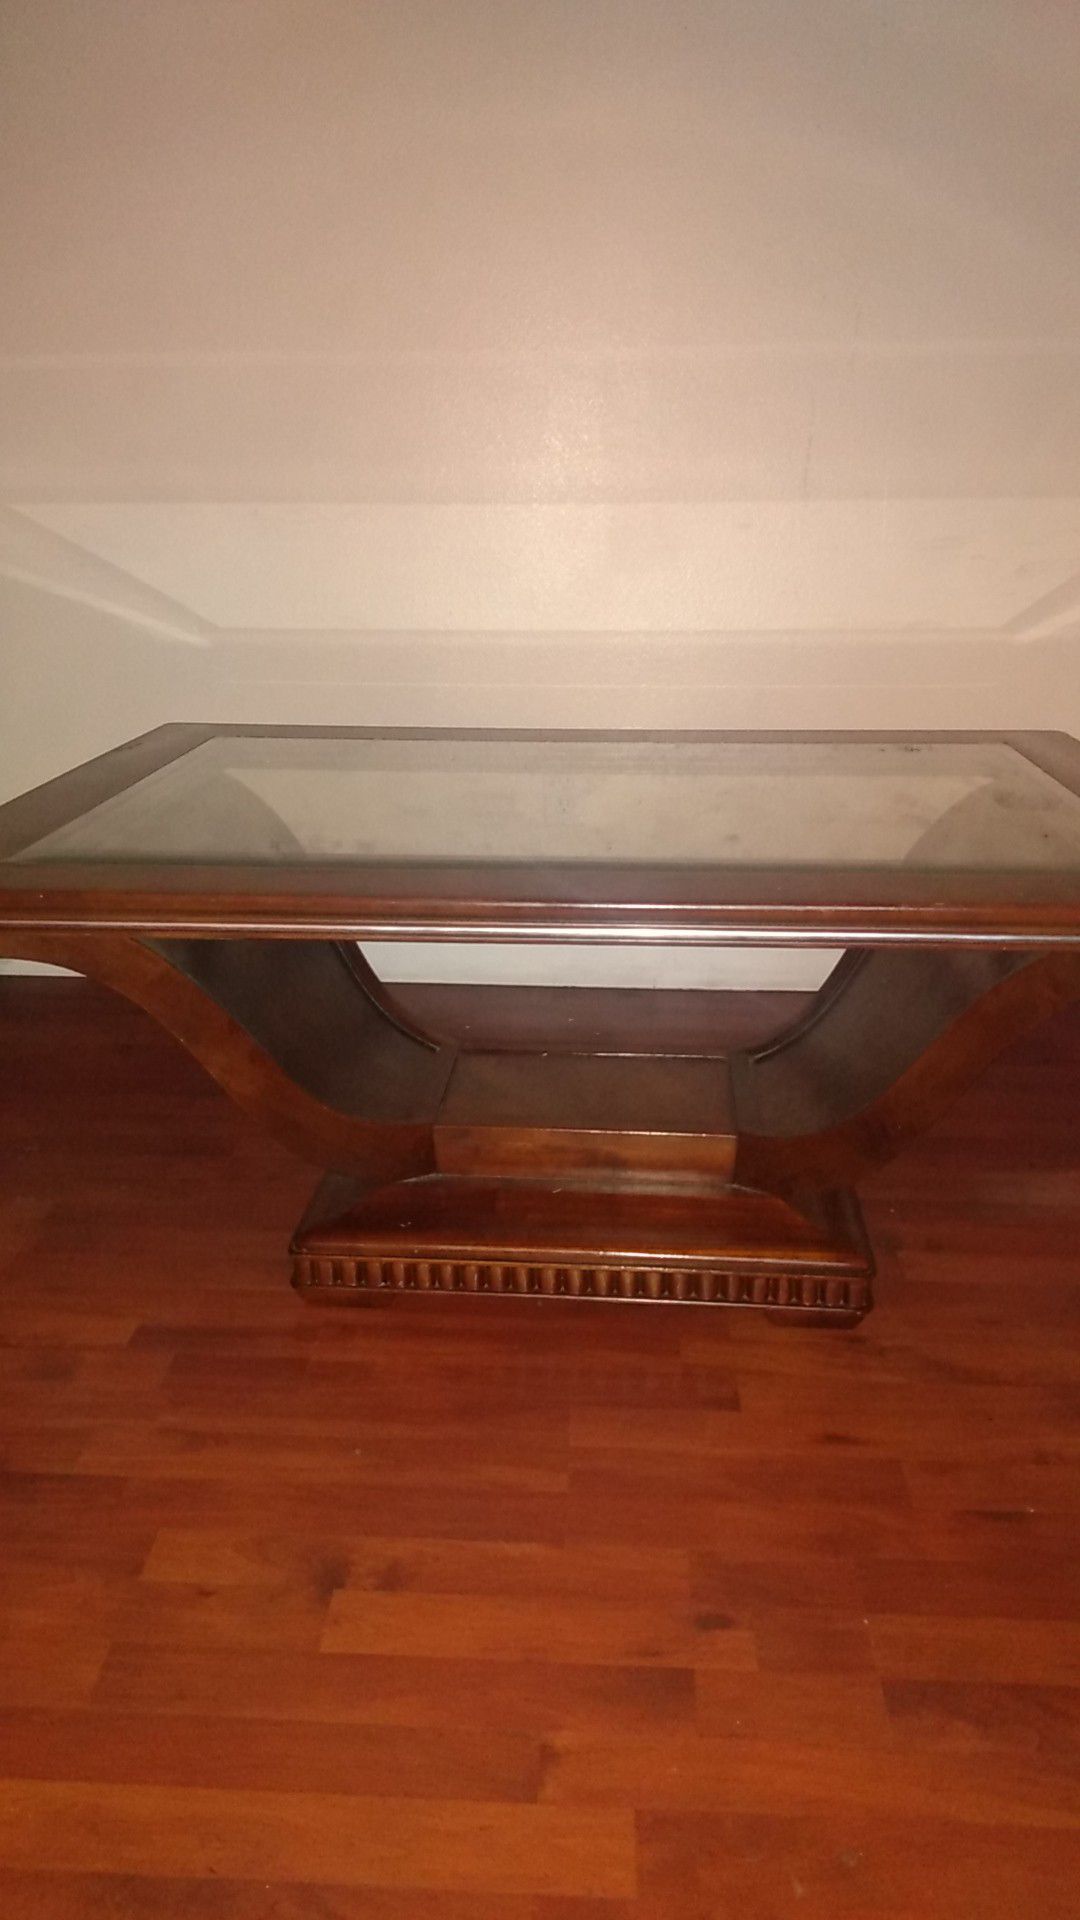 Coffee table with glass top I will Mark sold as soon as somebody picks it up if it is not marked sold it is still available